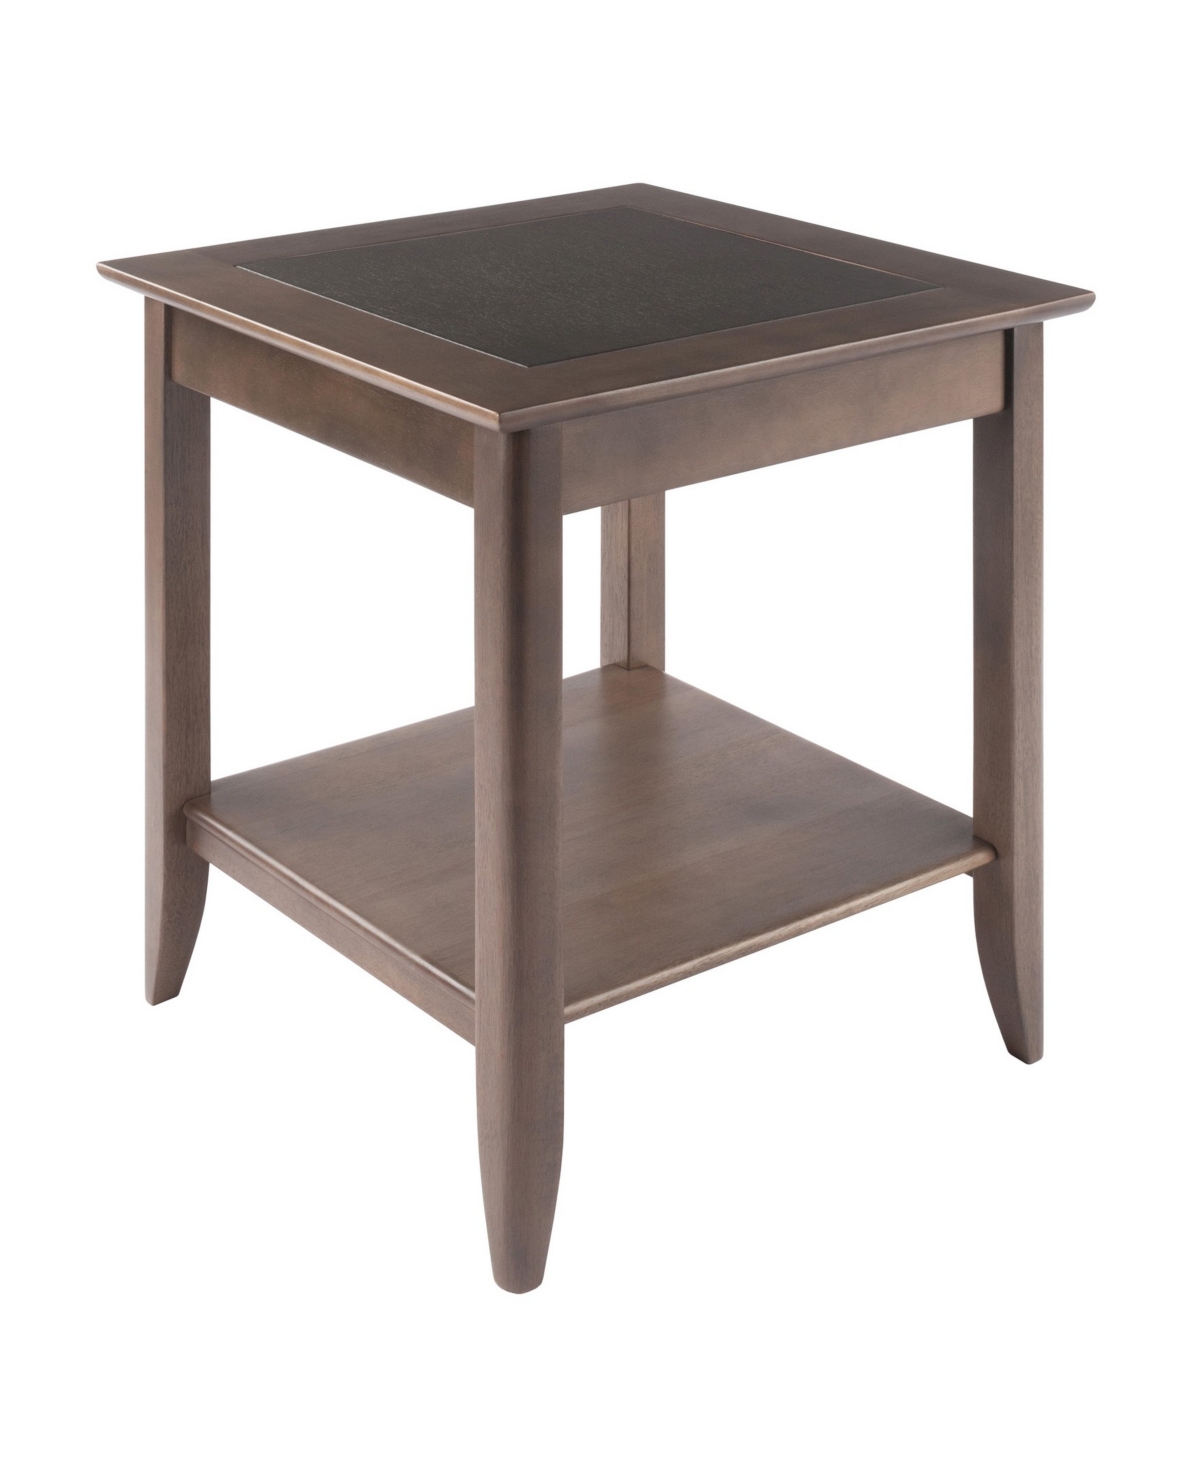 Winsome Santino 24.02" Wood Accent Table In Oyster Gray